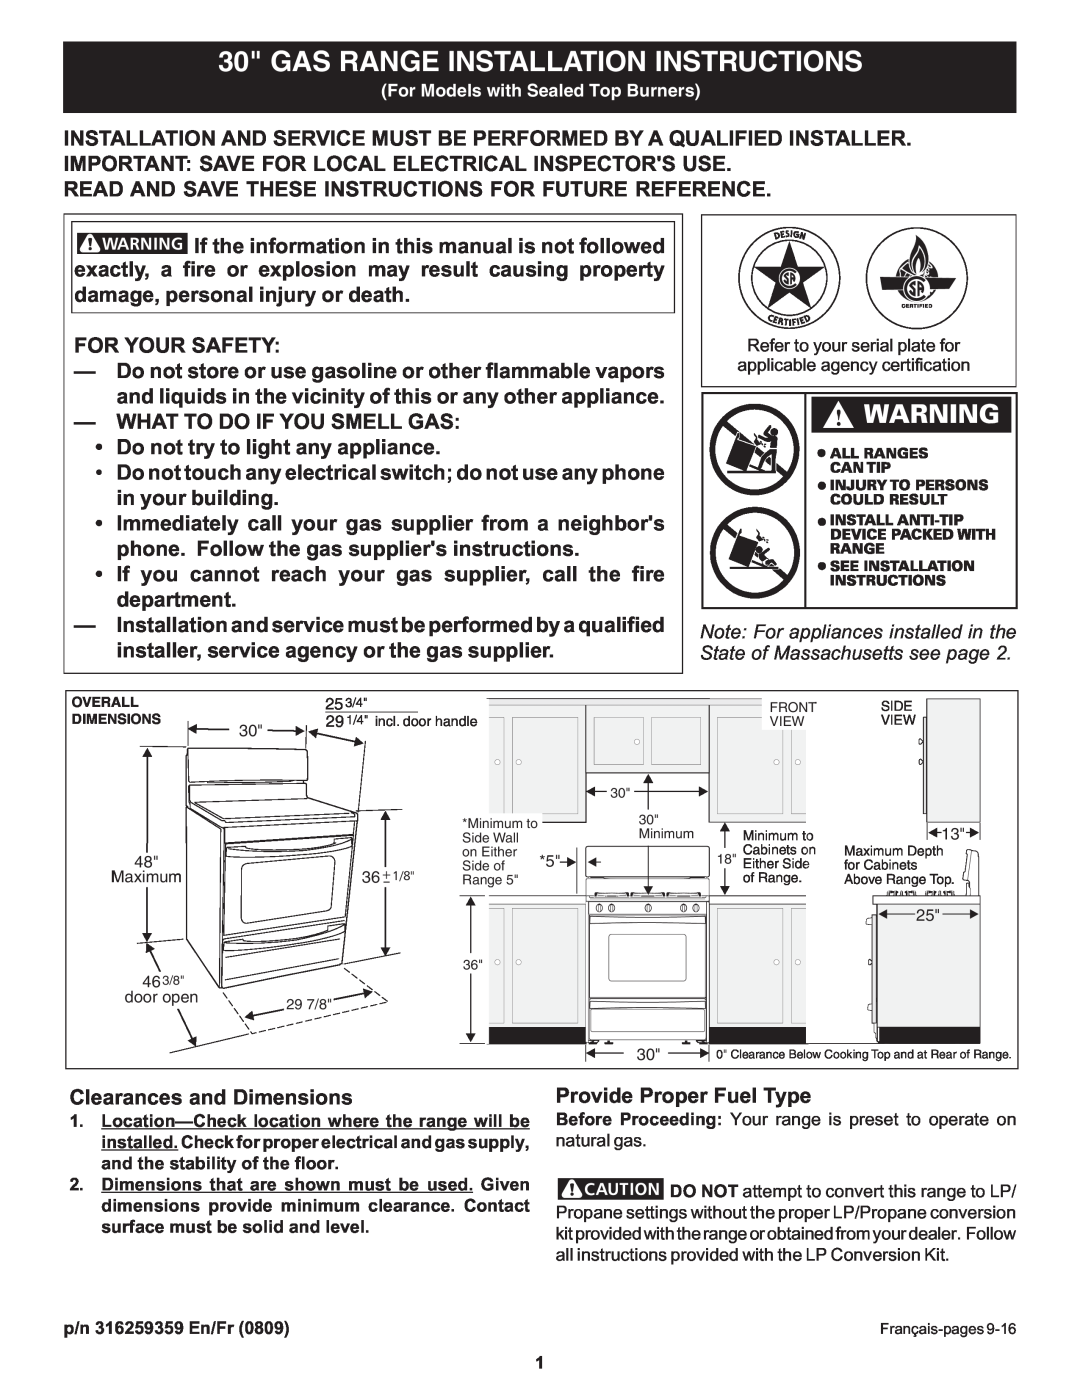 Frigidaire 316259359 dimensions Gas Range Installation Instructions, For Your Safety, What To Do If You Smell Gas 